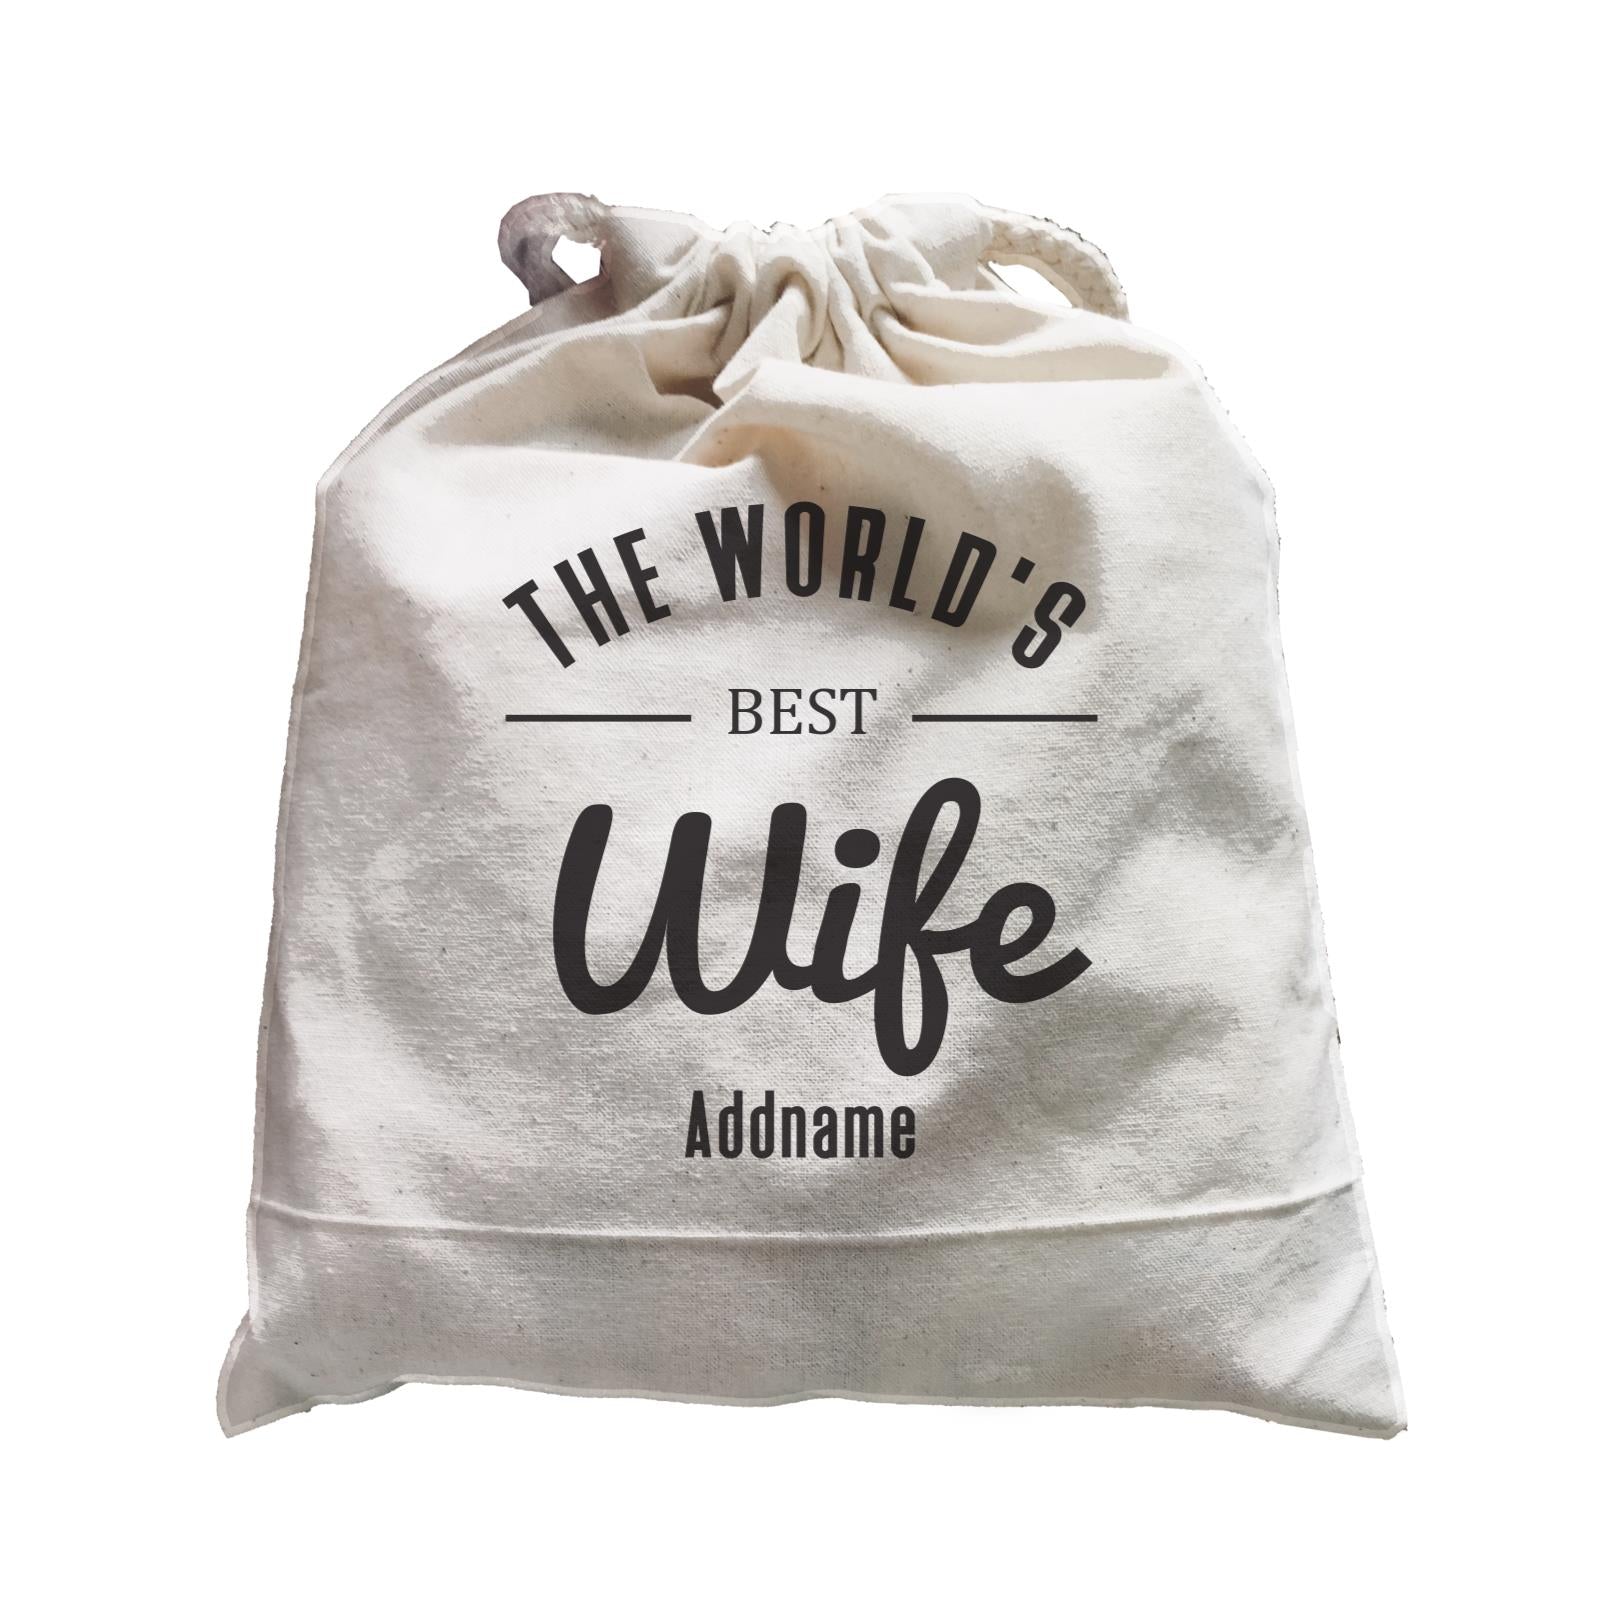 Husband and Wife The World's Best Wife Addname Satchel